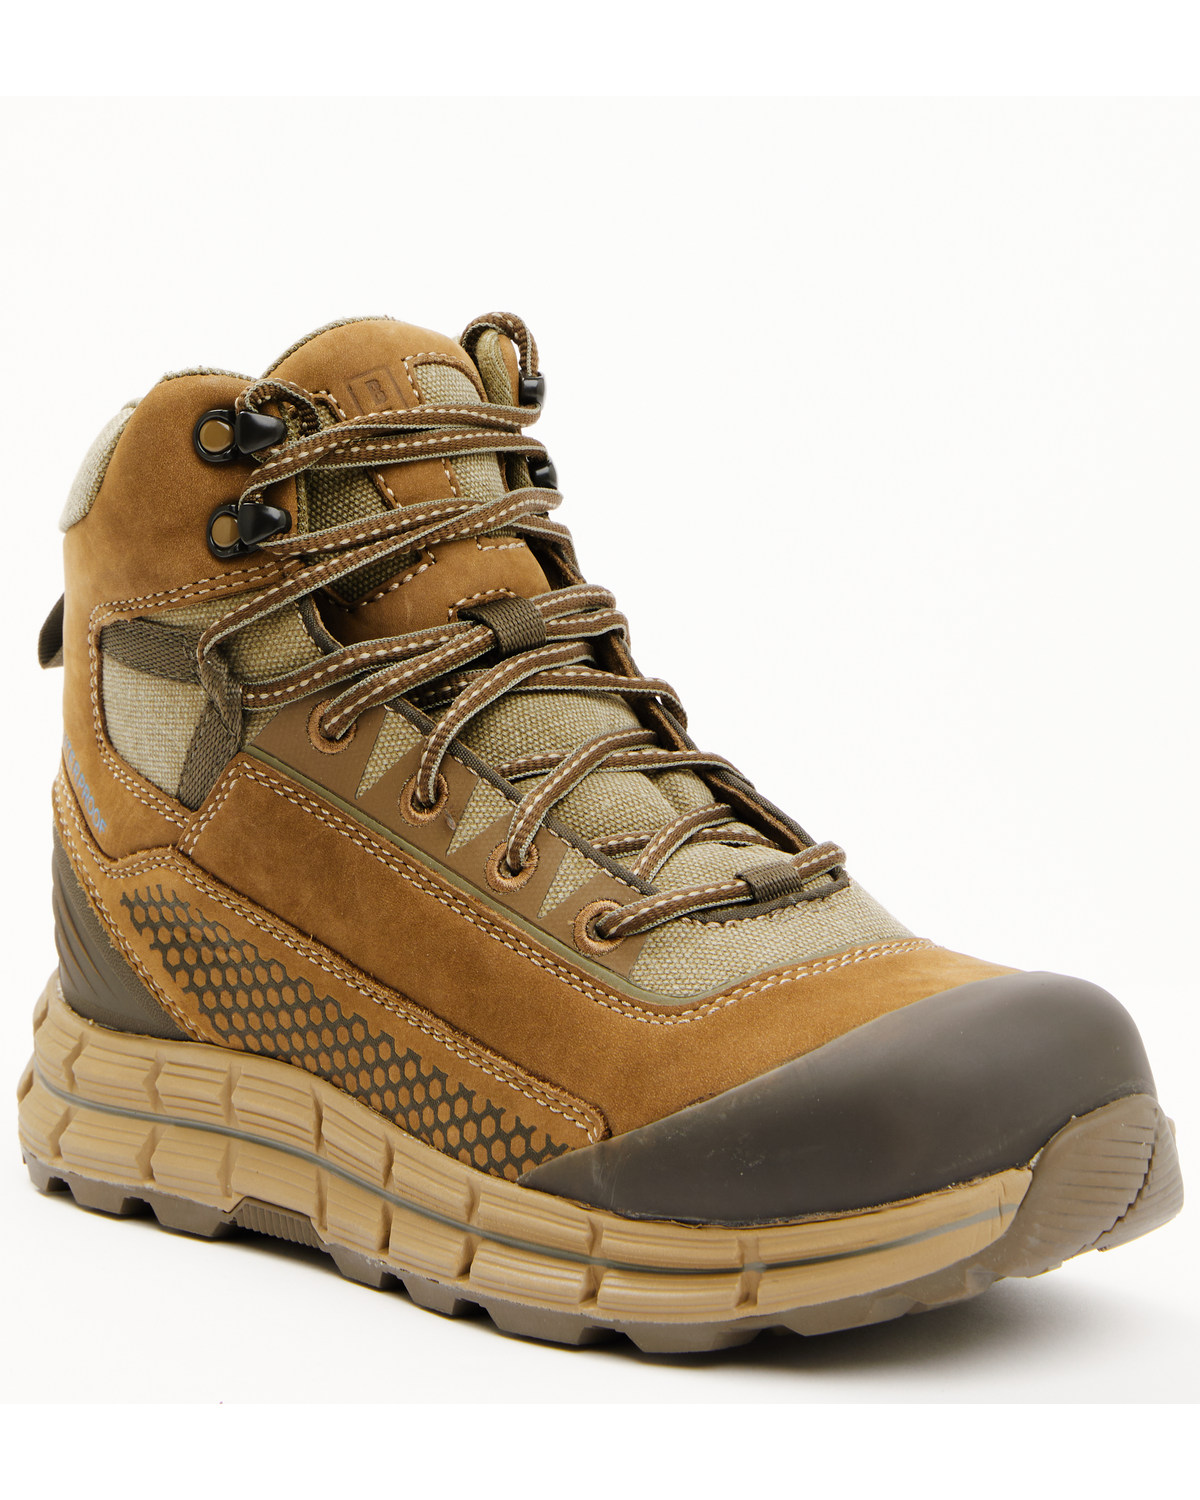 Brothers and Sons Men's Hikers Waterproof Hiking Boots - Soft Toe